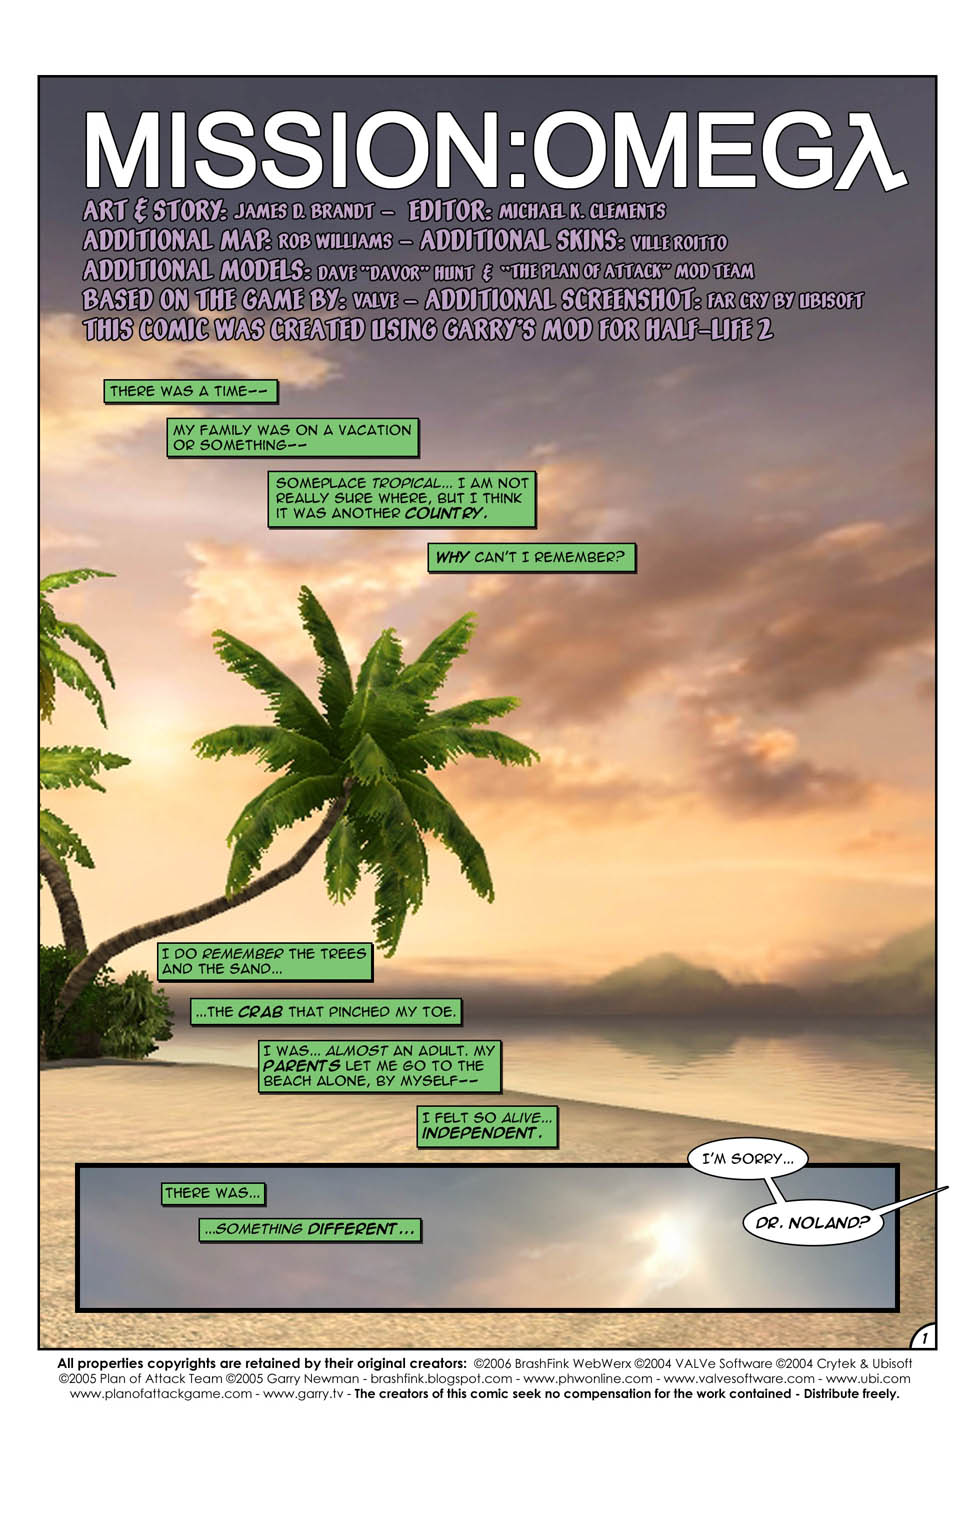 The comic begins with a dream sequence of a tropical beach. The narration describes a family holiday to someplace tropical, remembering the trees and the sand, a crab pinching their toe and going alone to the beach. The sequence is interrupted by someone calling Doctor Noland.